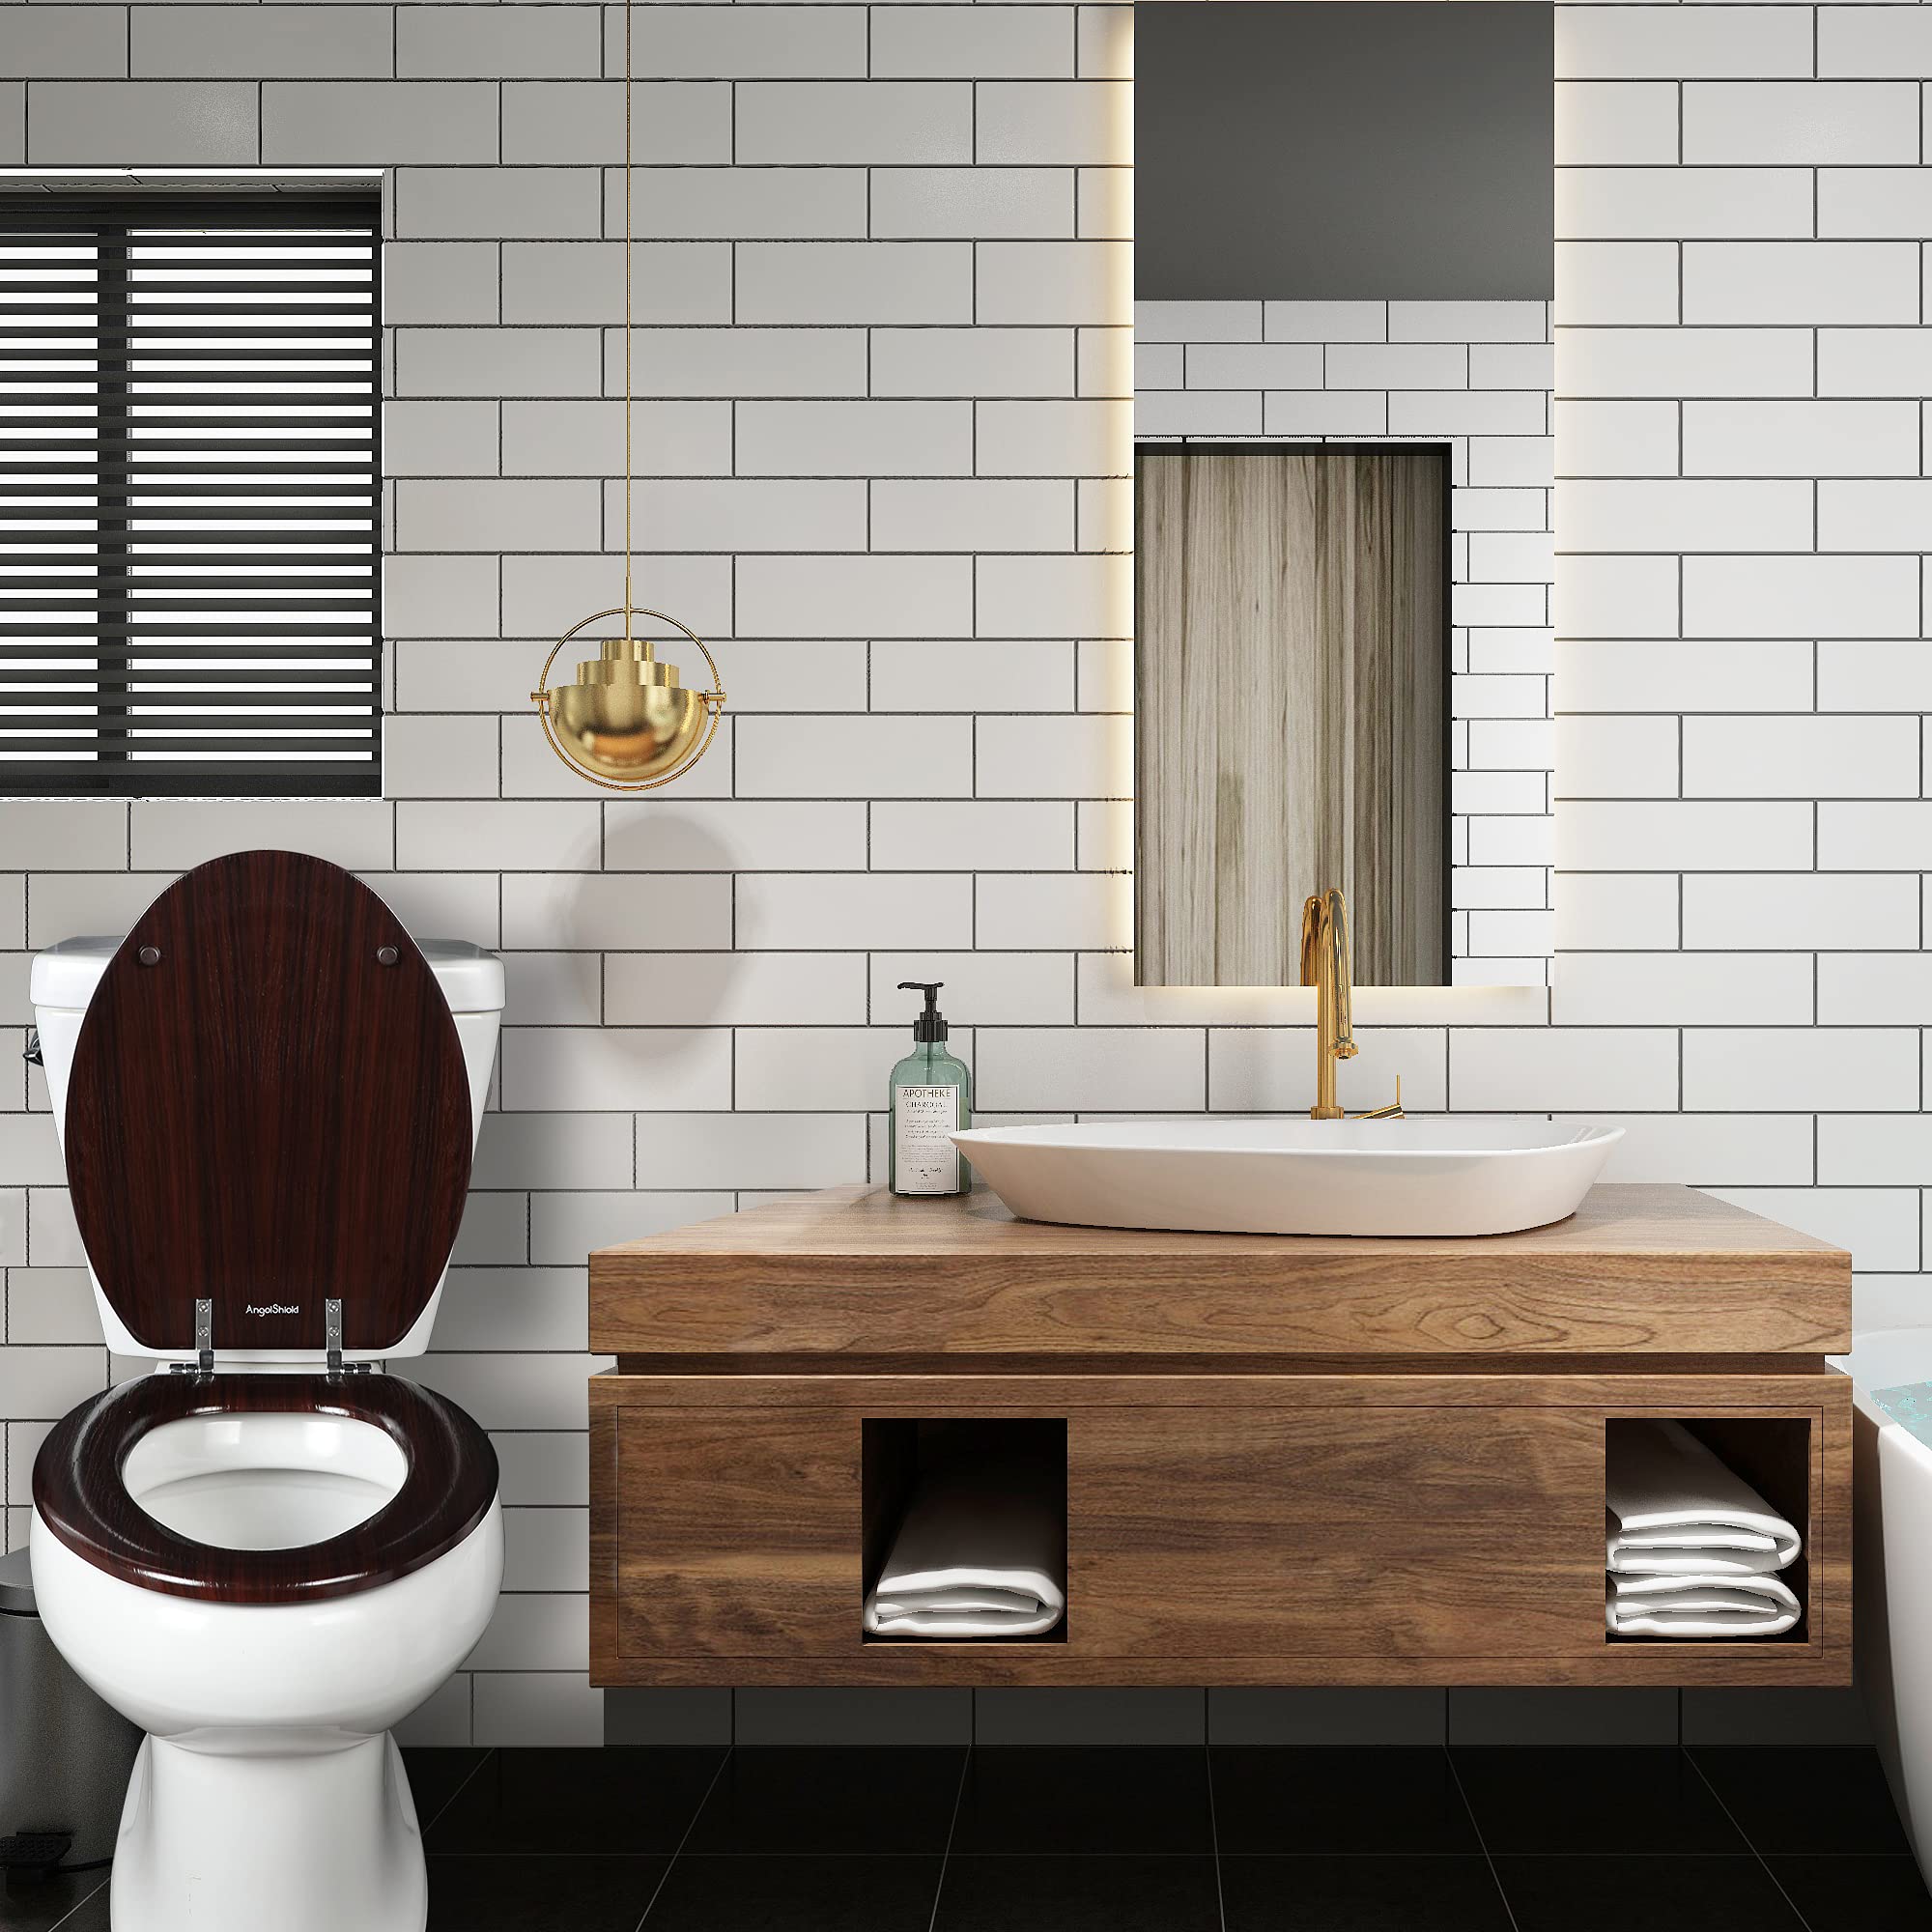 Elongated Toilet Seat Molded Wood Toilet Seat with Zinc Alloy Hinges, Easy to Install also Easy to Clean, Anti-pinch Wooden Toilet Seat by Angol Shiold (Elongated, Dark Brown)